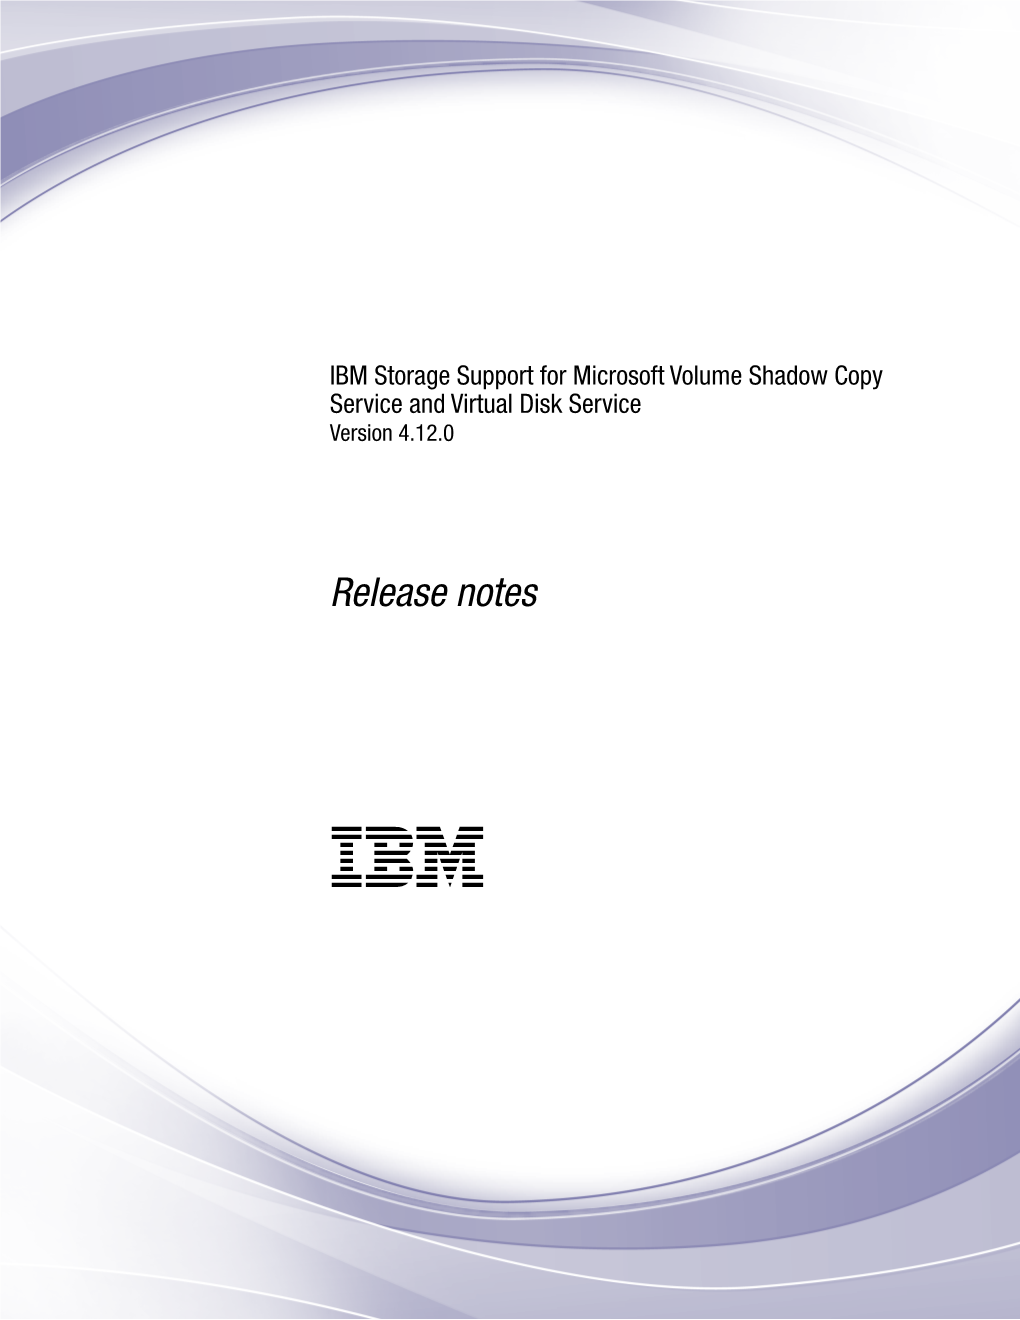 IBM Storage Support for Microsoft Volume Shadow Copy Service and Virtual Disk Service Version 4.12.0